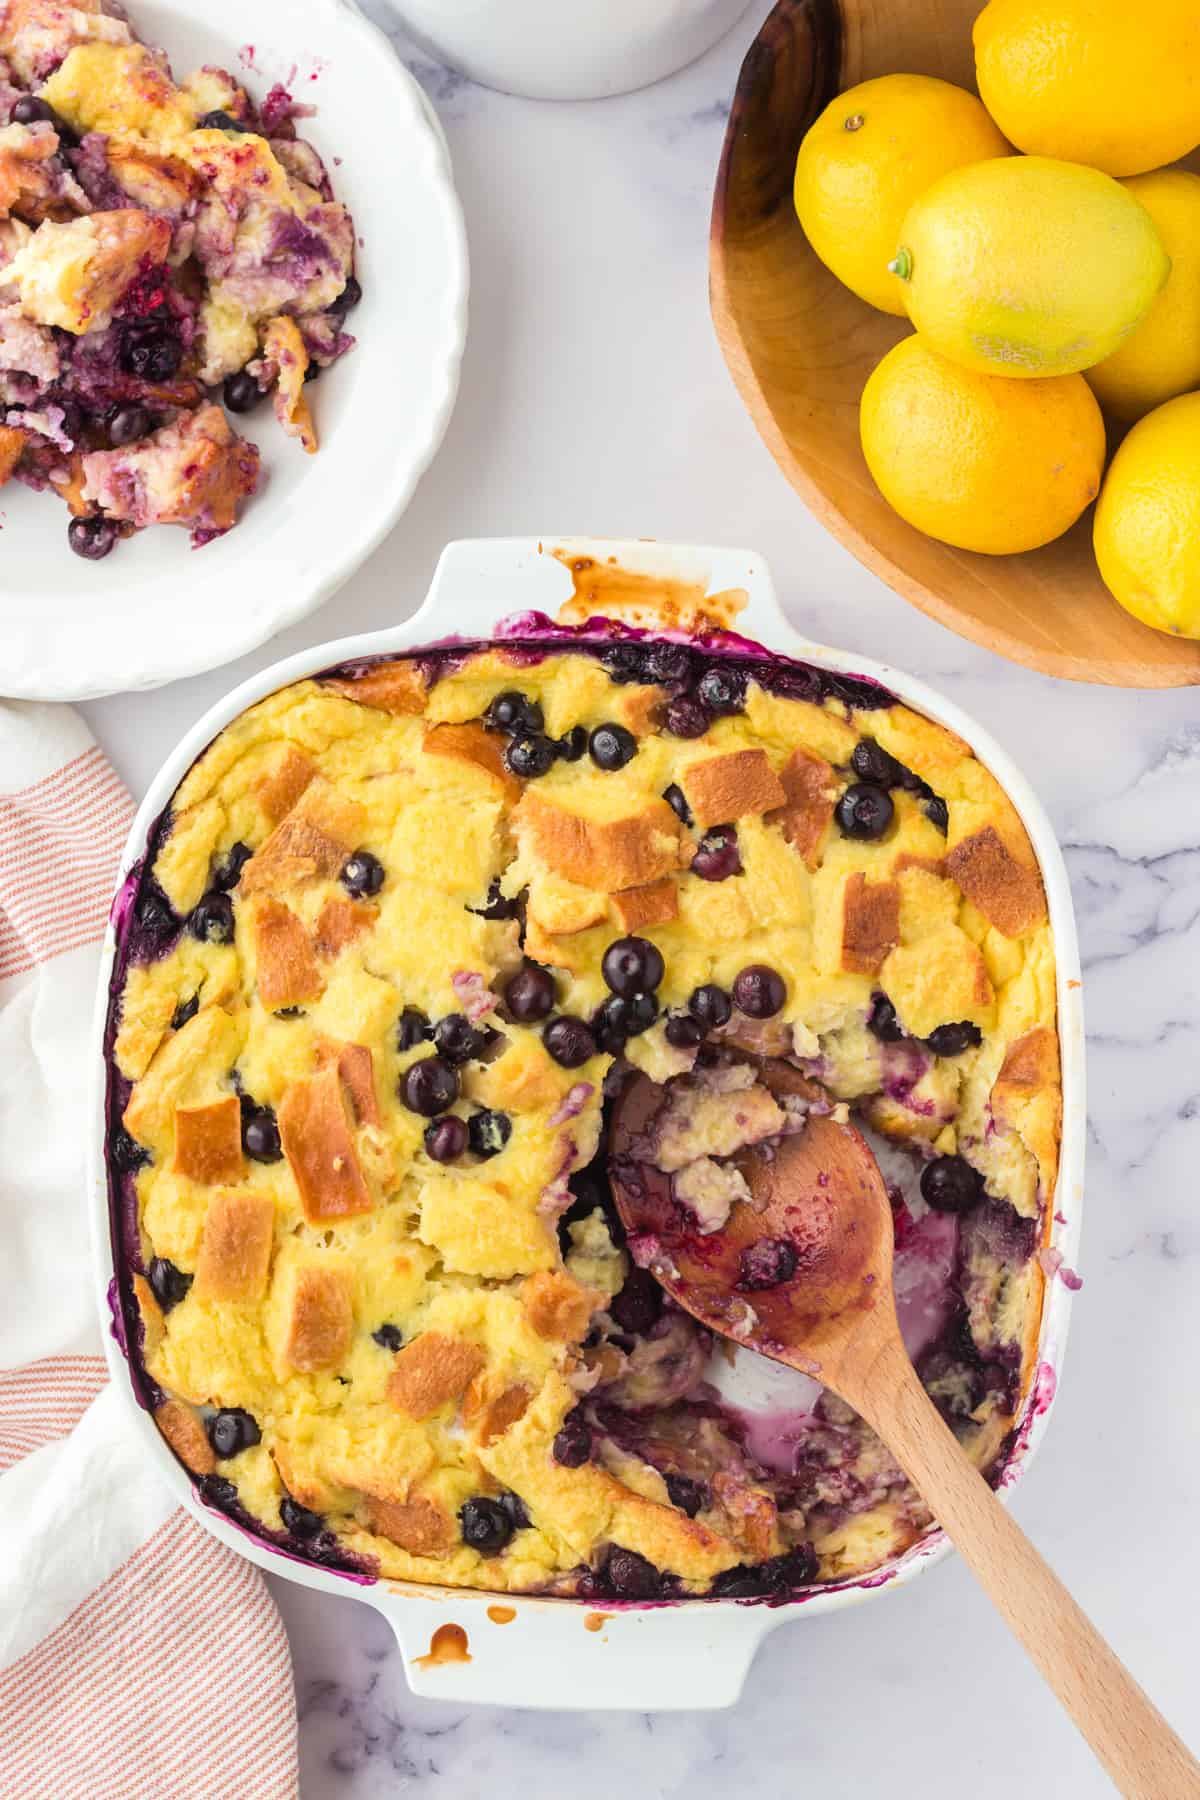 Lemon Blueberry Bread pudding with wooden serving spoon resting in dish after several servings were removed.